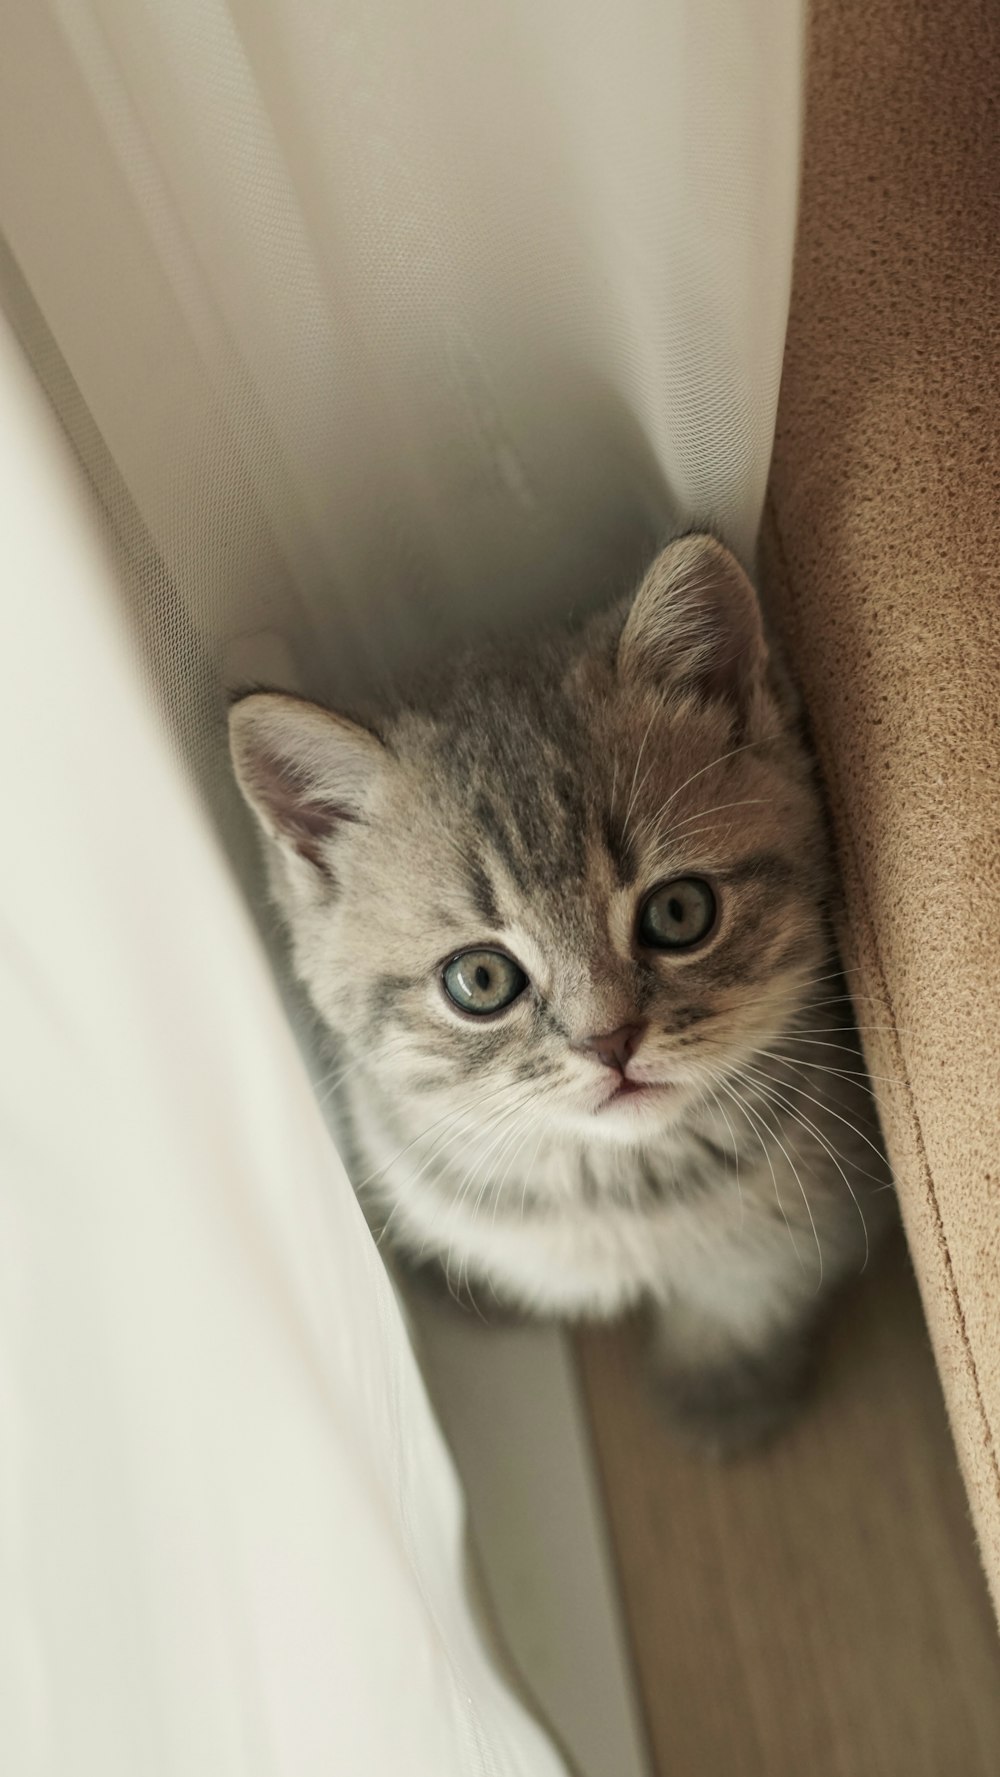 a small kitten peeking out from behind a curtain